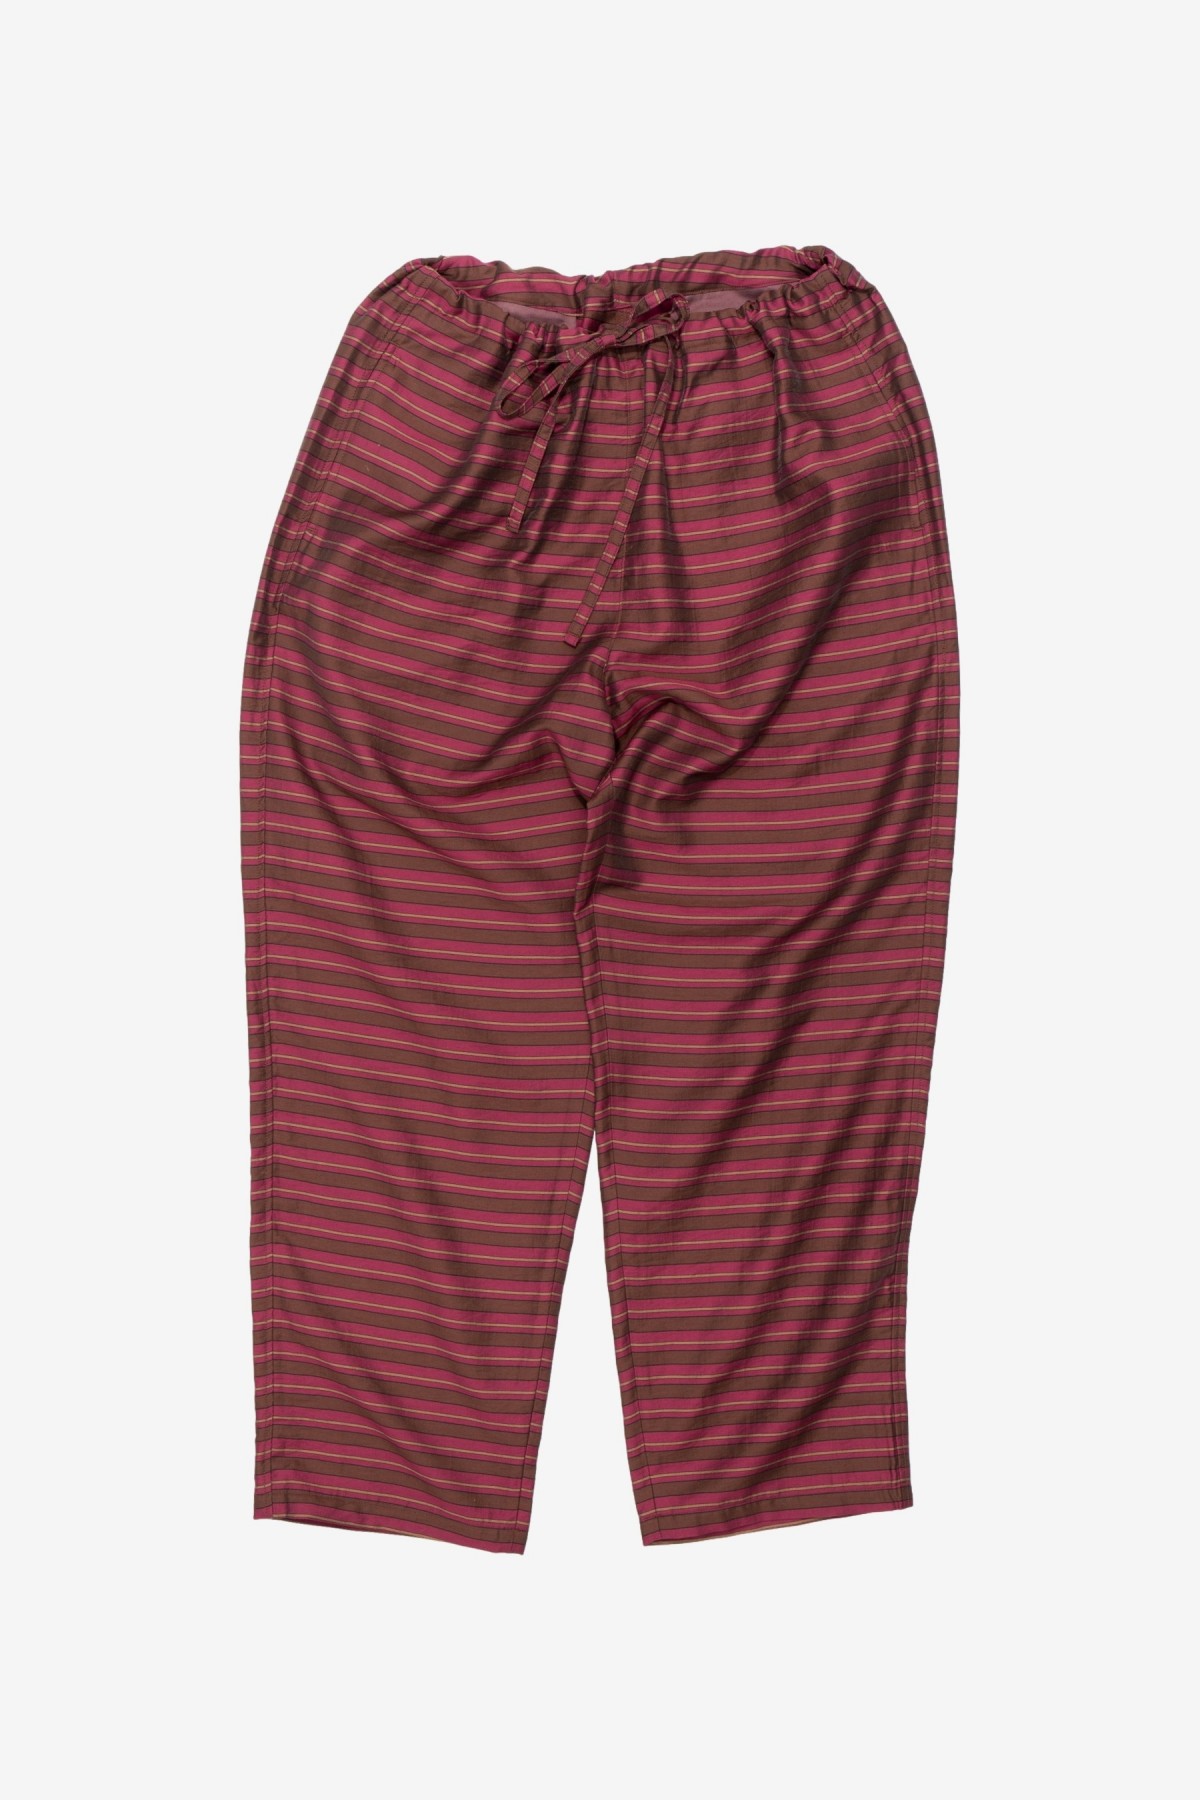 Ts(s) Drawstring Pants in Brown Wine